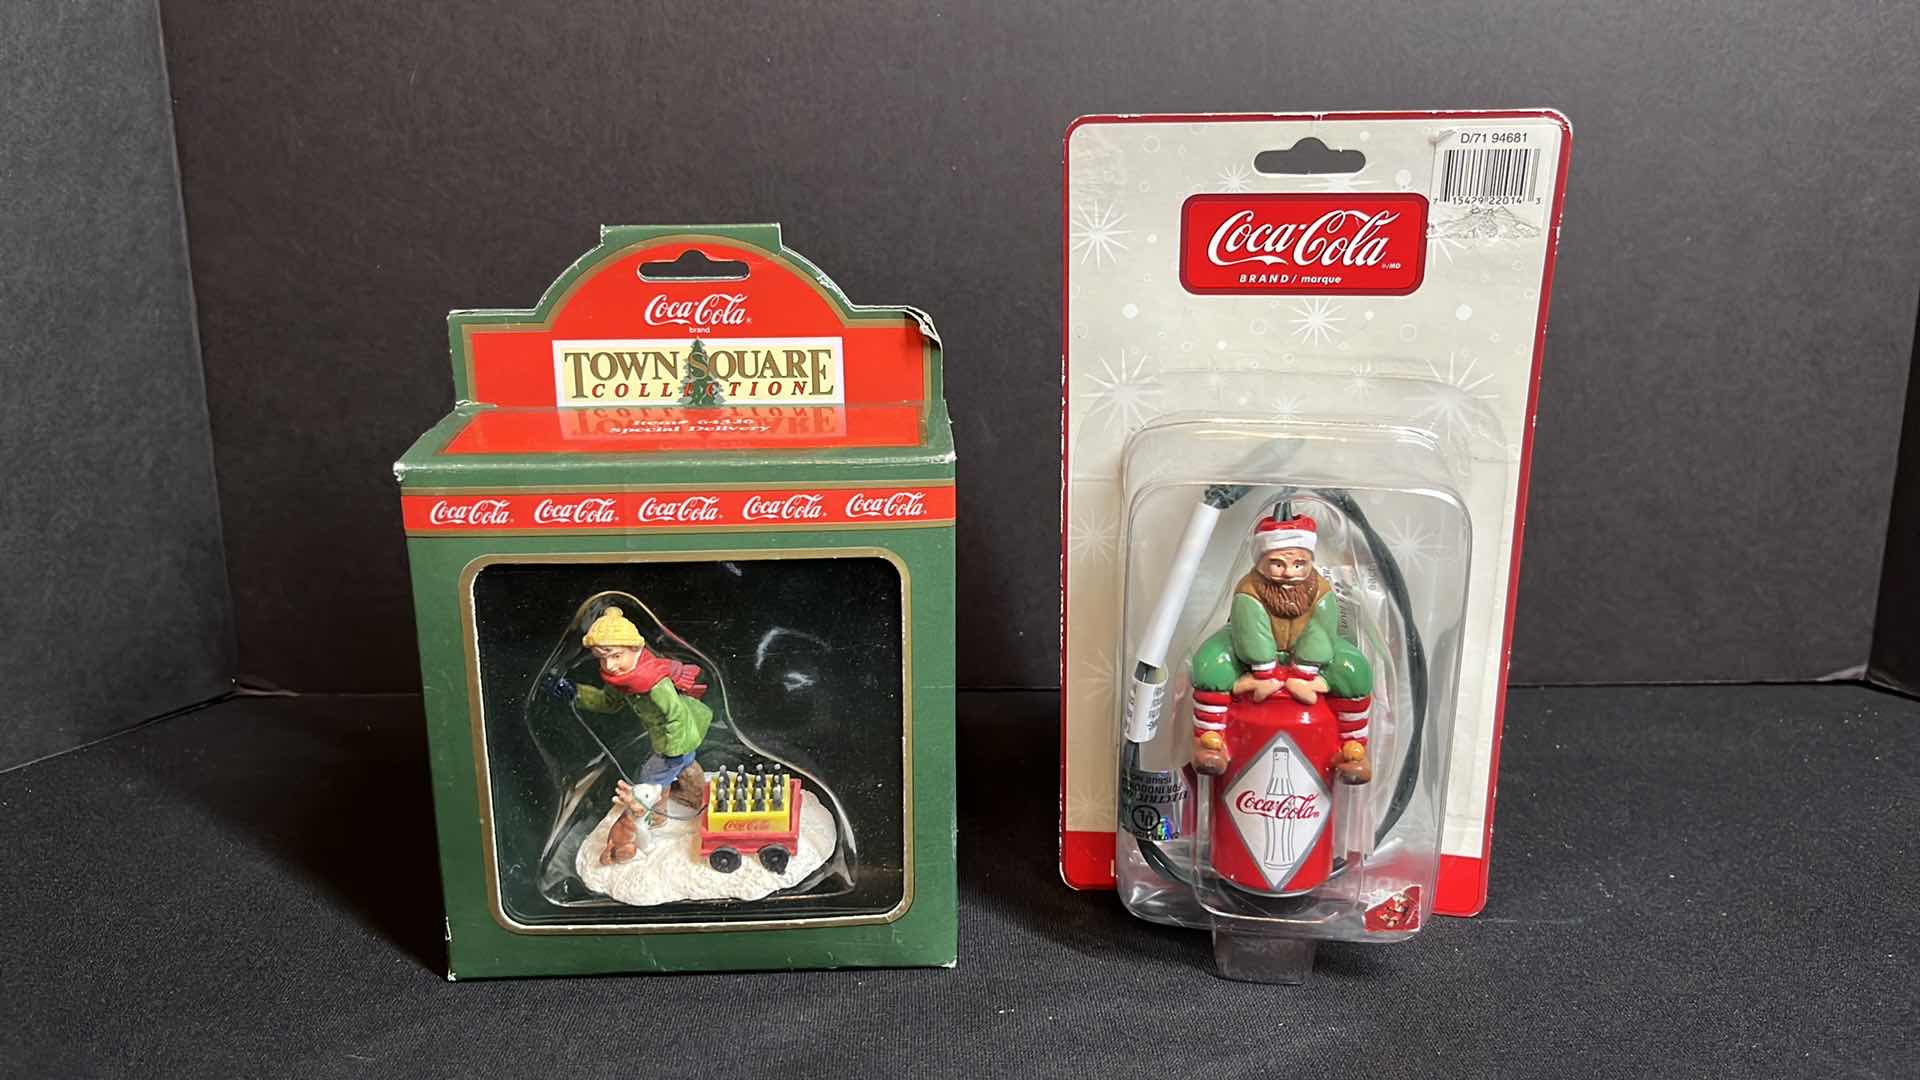 Photo 1 of COCA-COLA CHRISTMAS ORNAMENTS, TOWN SQUARE COLLECTION SPECIAL DELIVERY 1994 (ITEM #64326), TRIM A TREE ILLUMINATED ORNAMENT 2003 (ITEM #CA079912)